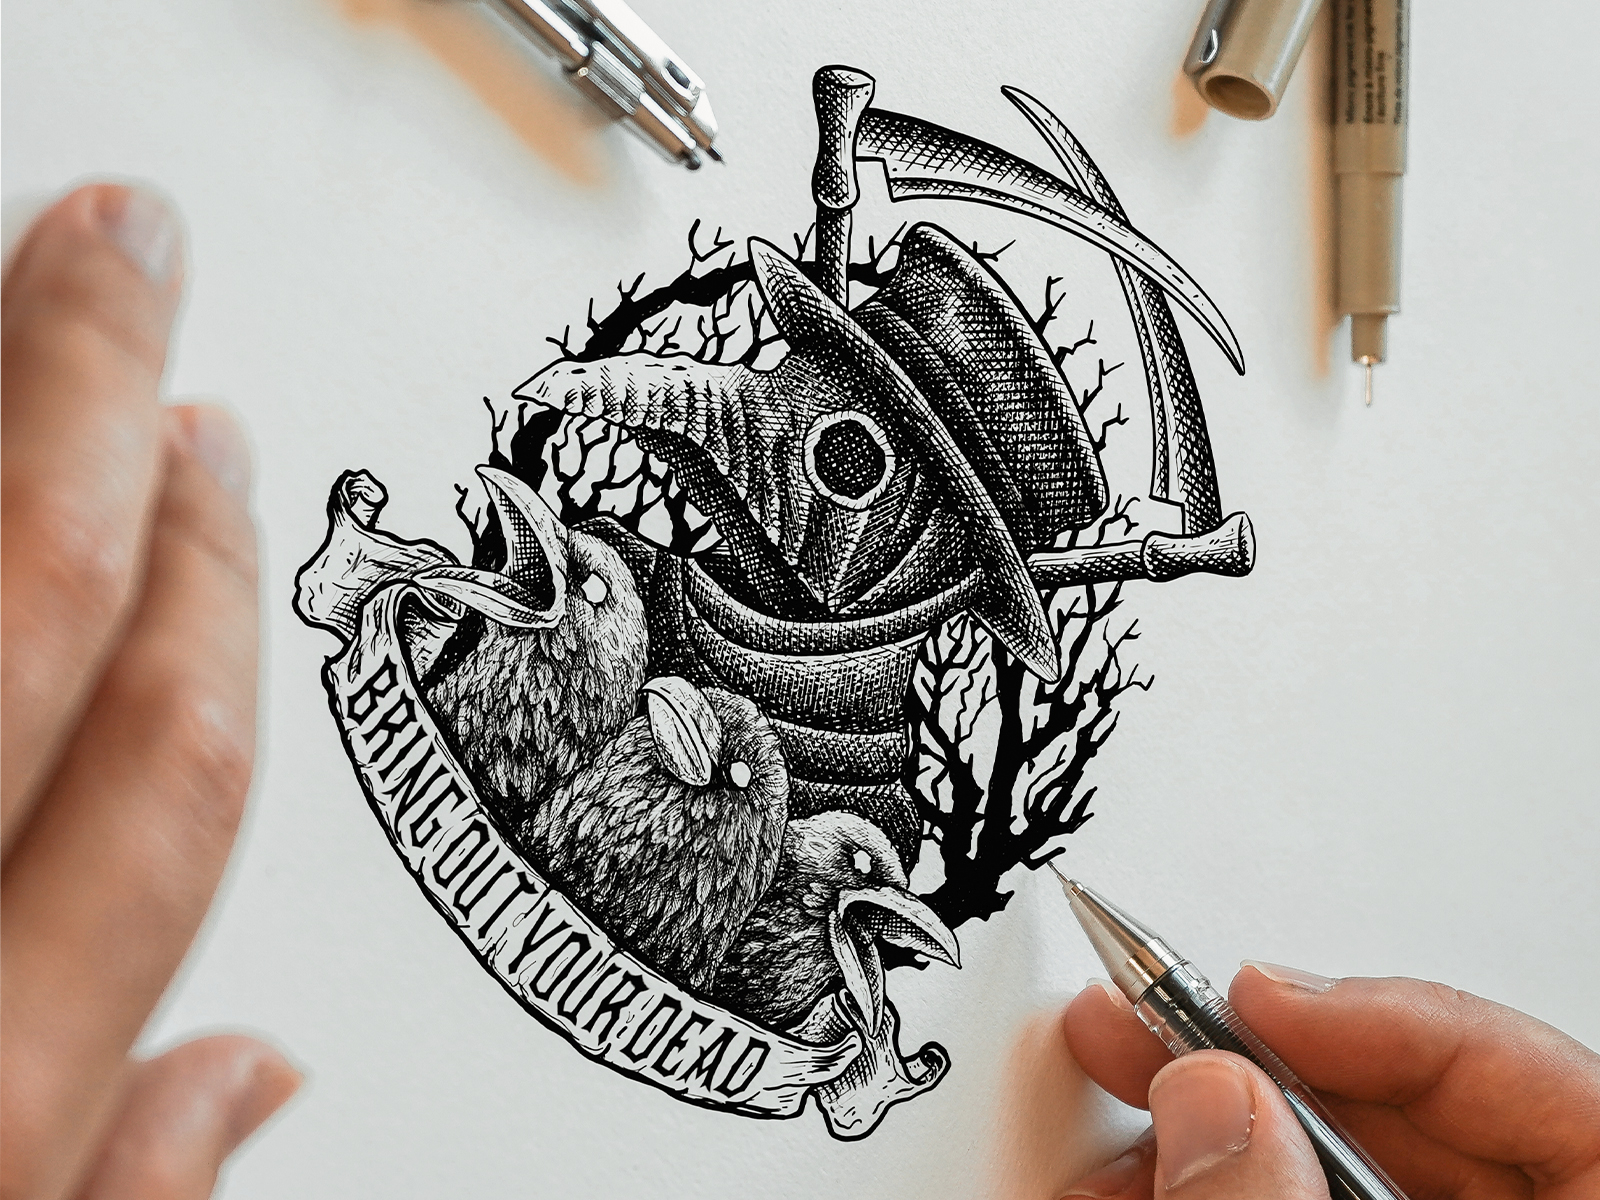 15 Best Tattoo Sketch Designs For Men And Women